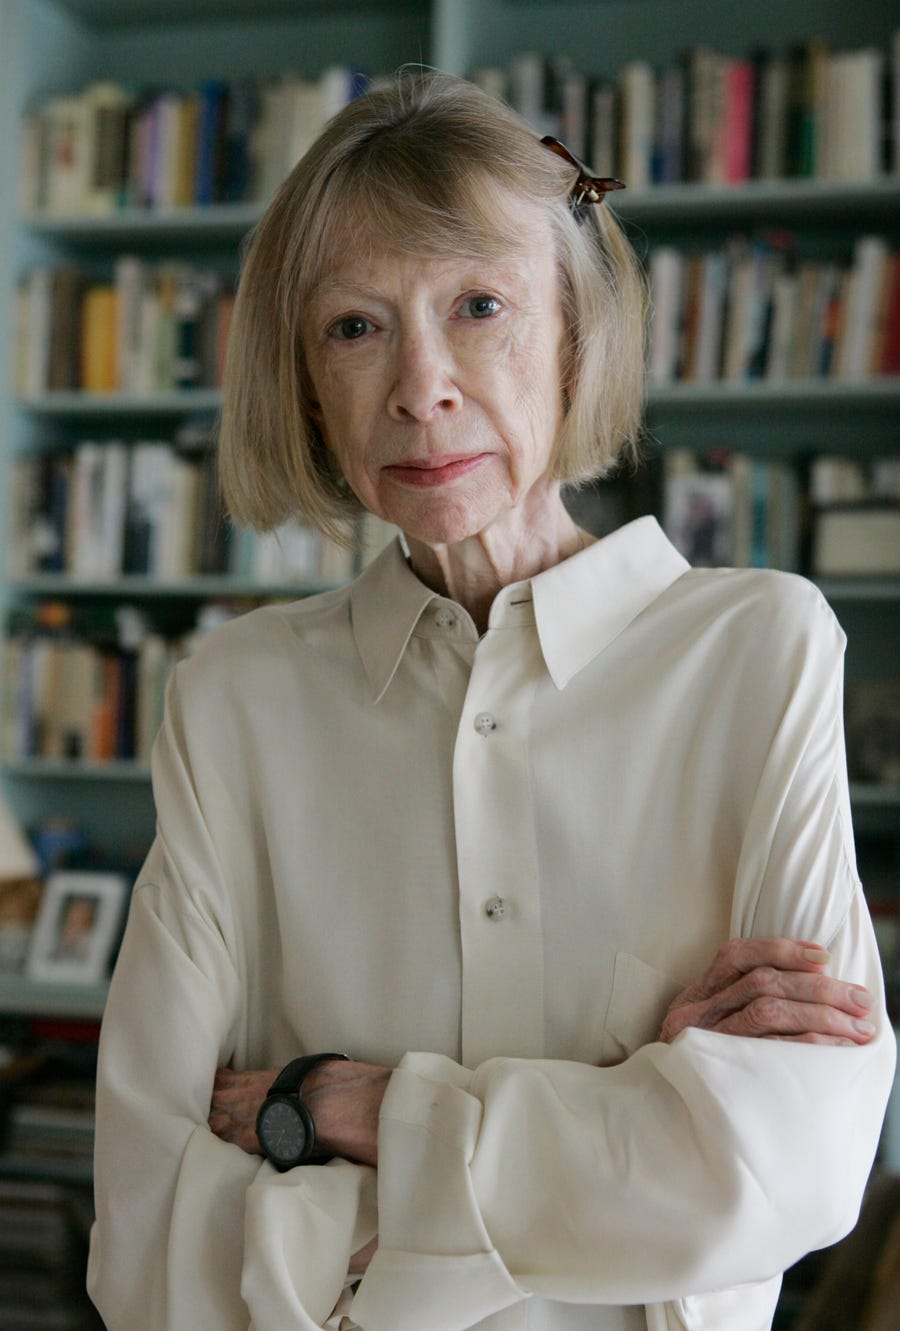 Author Joan Didion poses for a portrait, Monday, Sept. 26, 2005, in her New York apartment. Didion, the revered author and essayist whose provocative social commentary and detached, methodical literary voice made her a uniquely clear-eyed critic of a uniquely turbulent time, has died. She was 87.